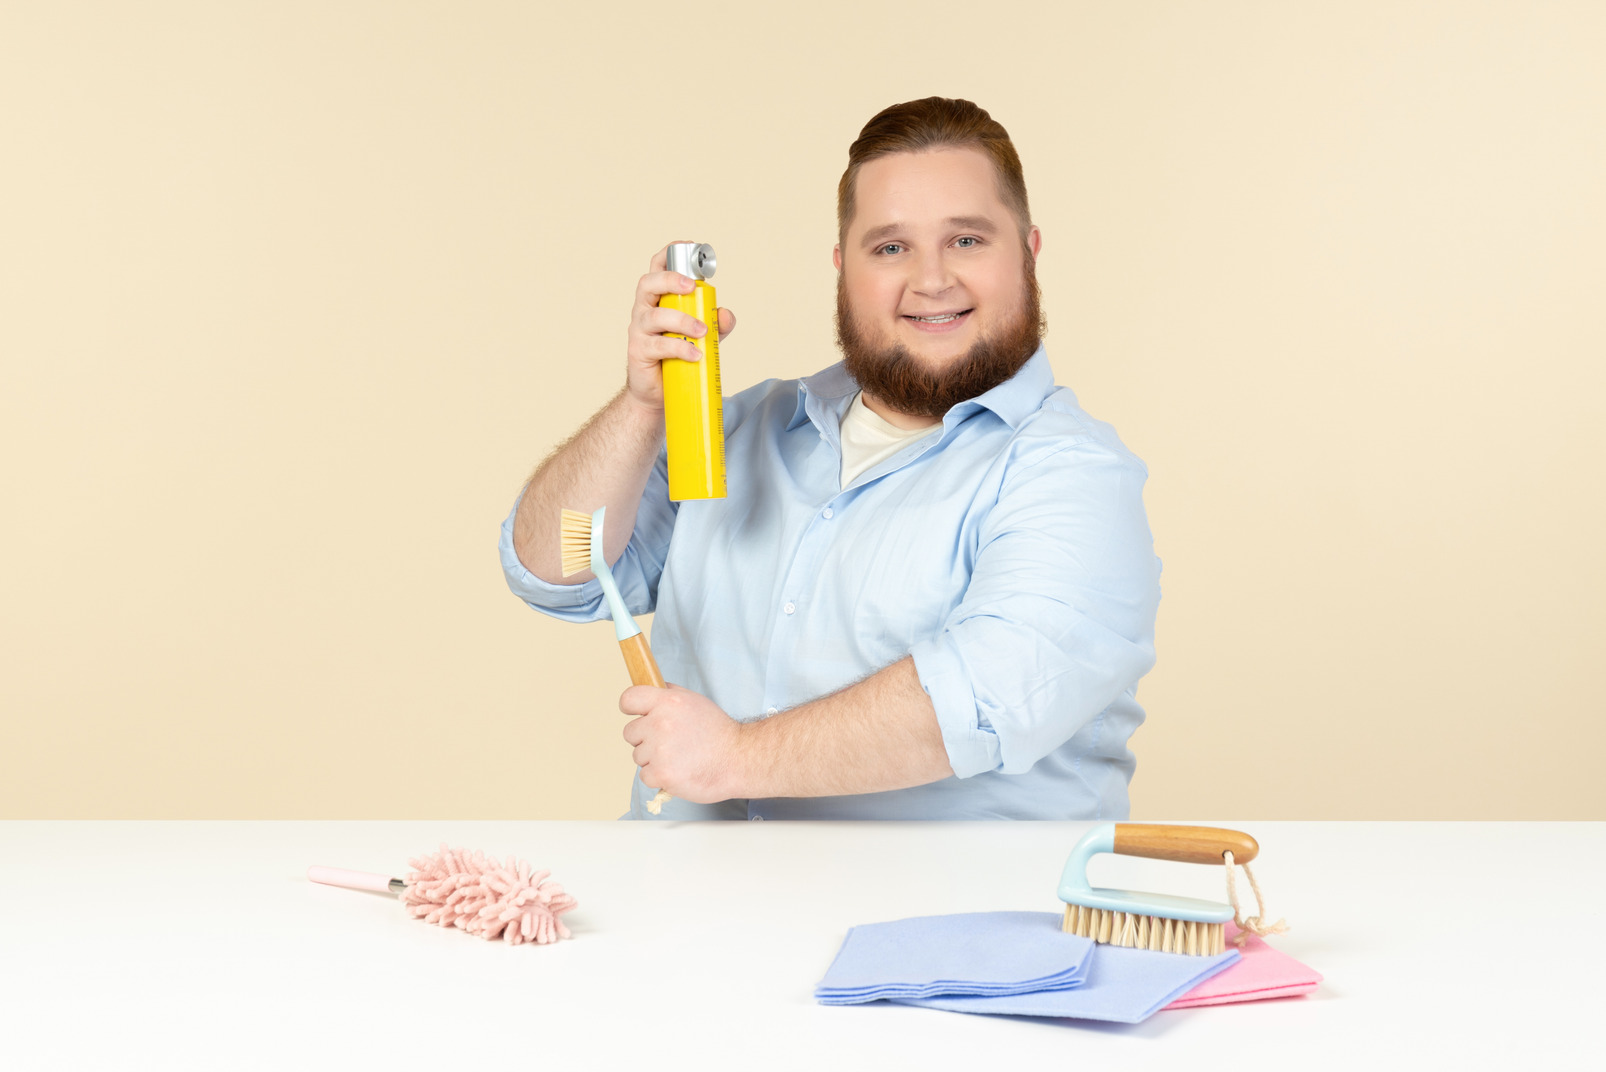 Contented young overweight man sitting at the table and holding cleaning tools